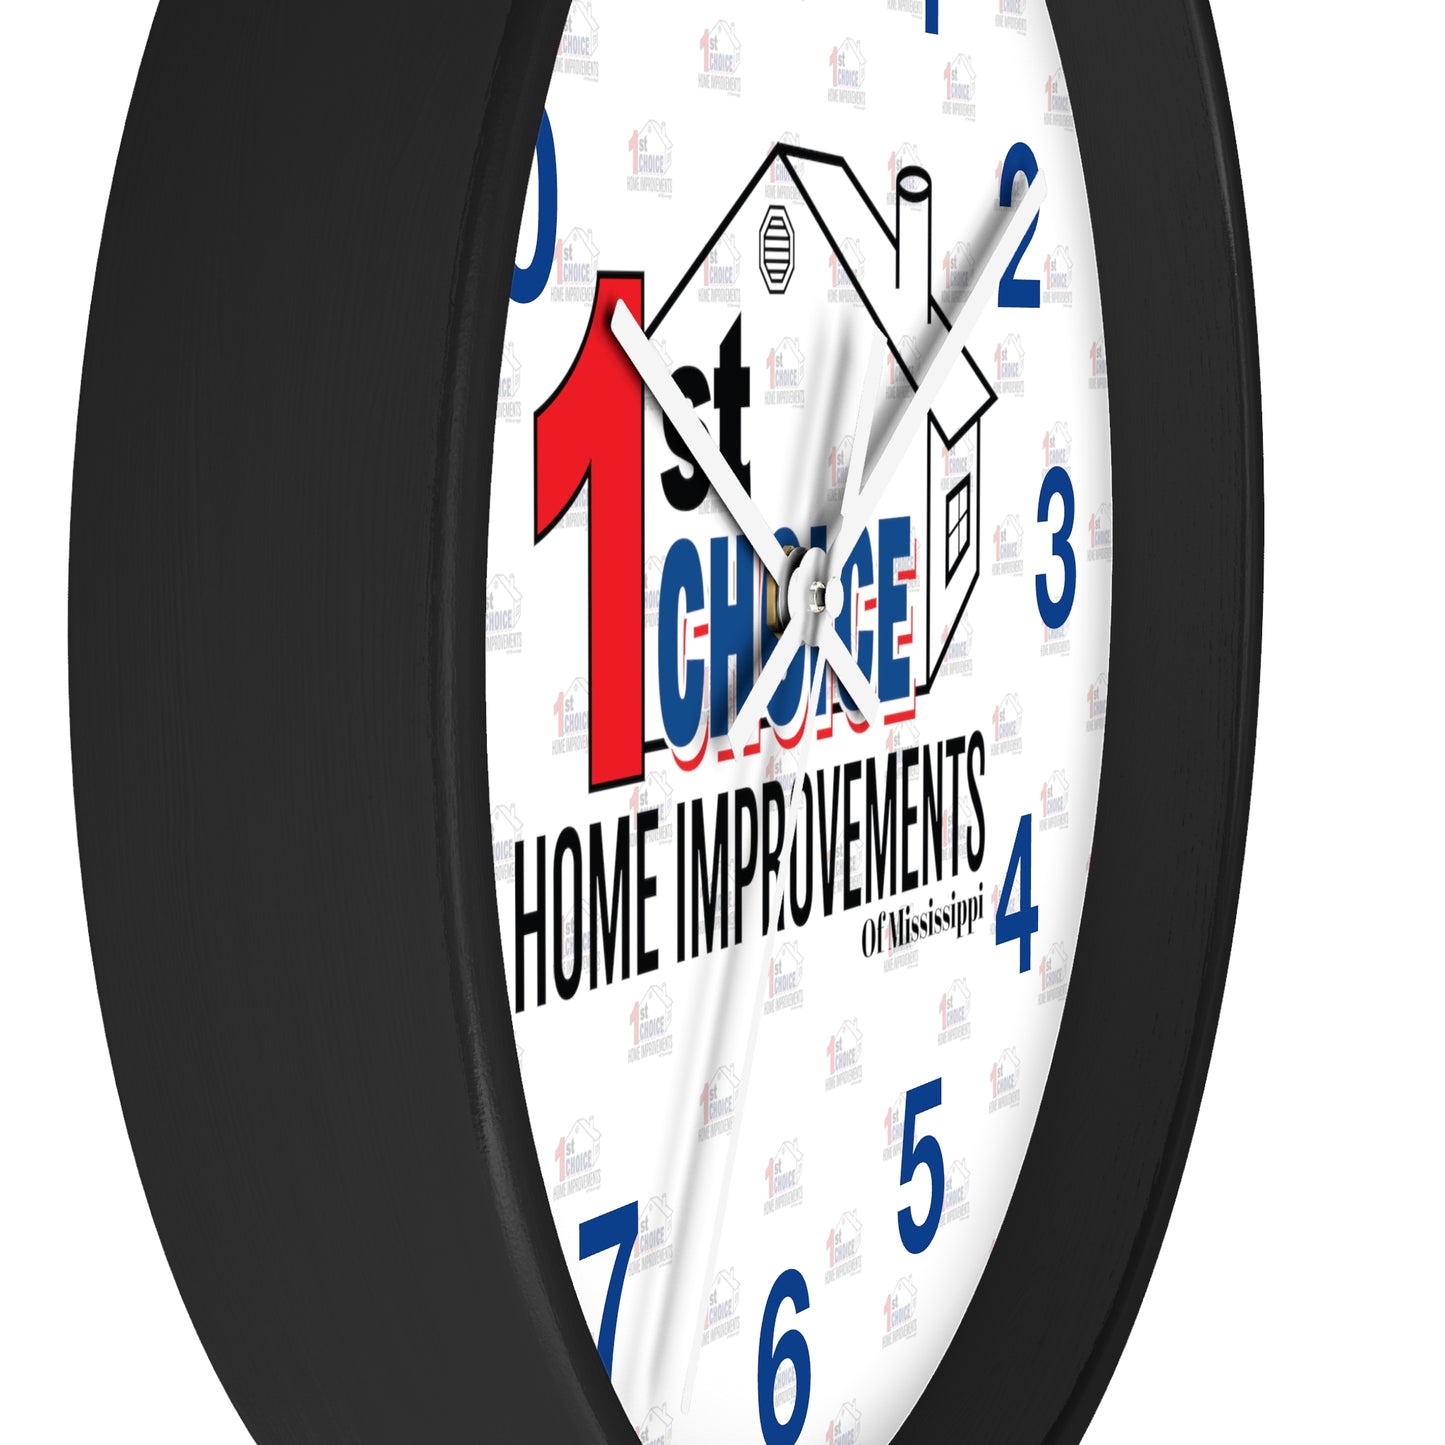 1st Choice of Mississippi Wall Clock